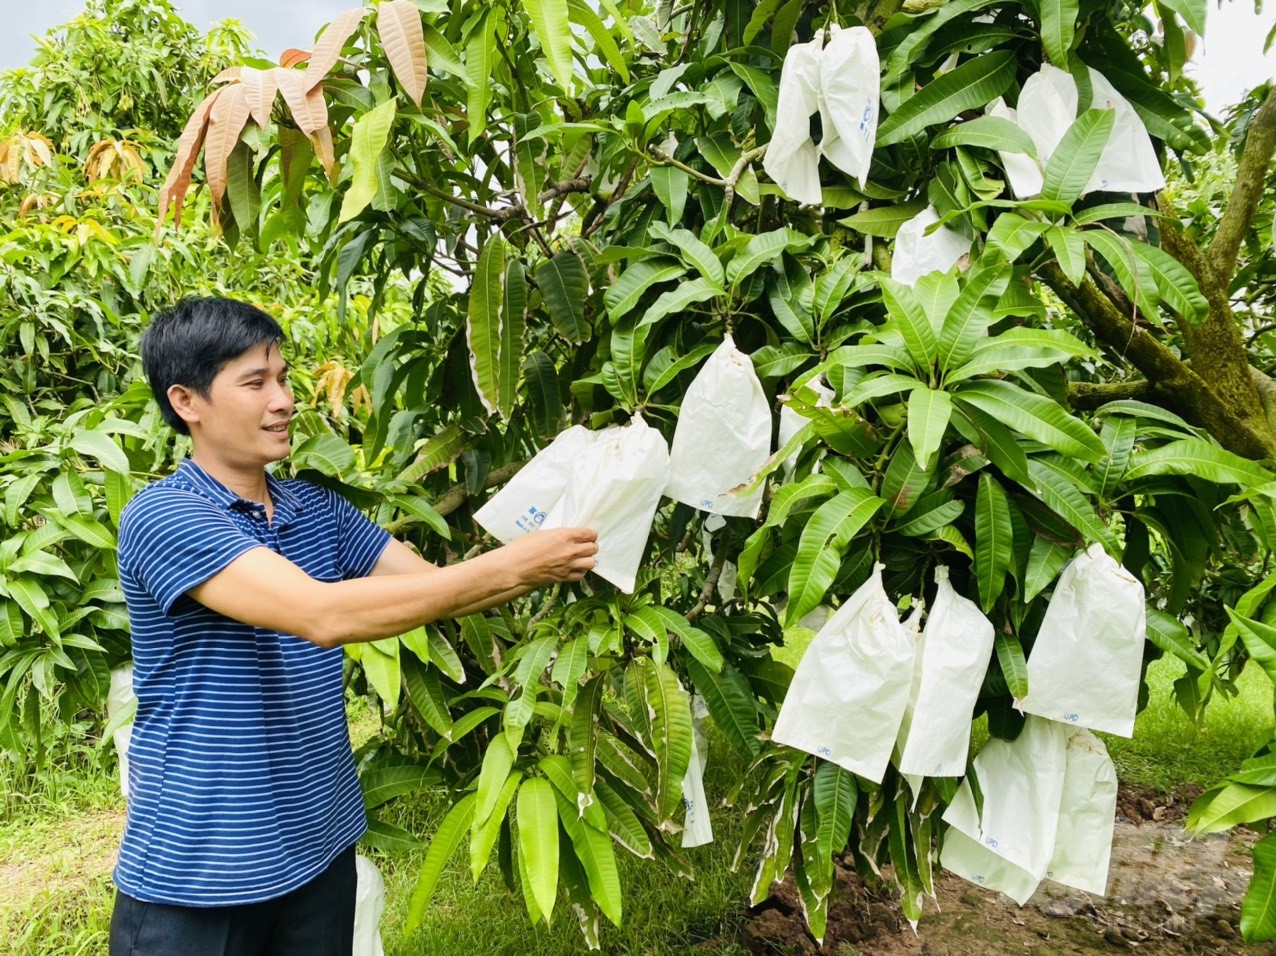 It is expected that by 2025, the area of fruit trees in Dong Thap province will reach over 46,400 ha. Photo: Le Hoang Vu.